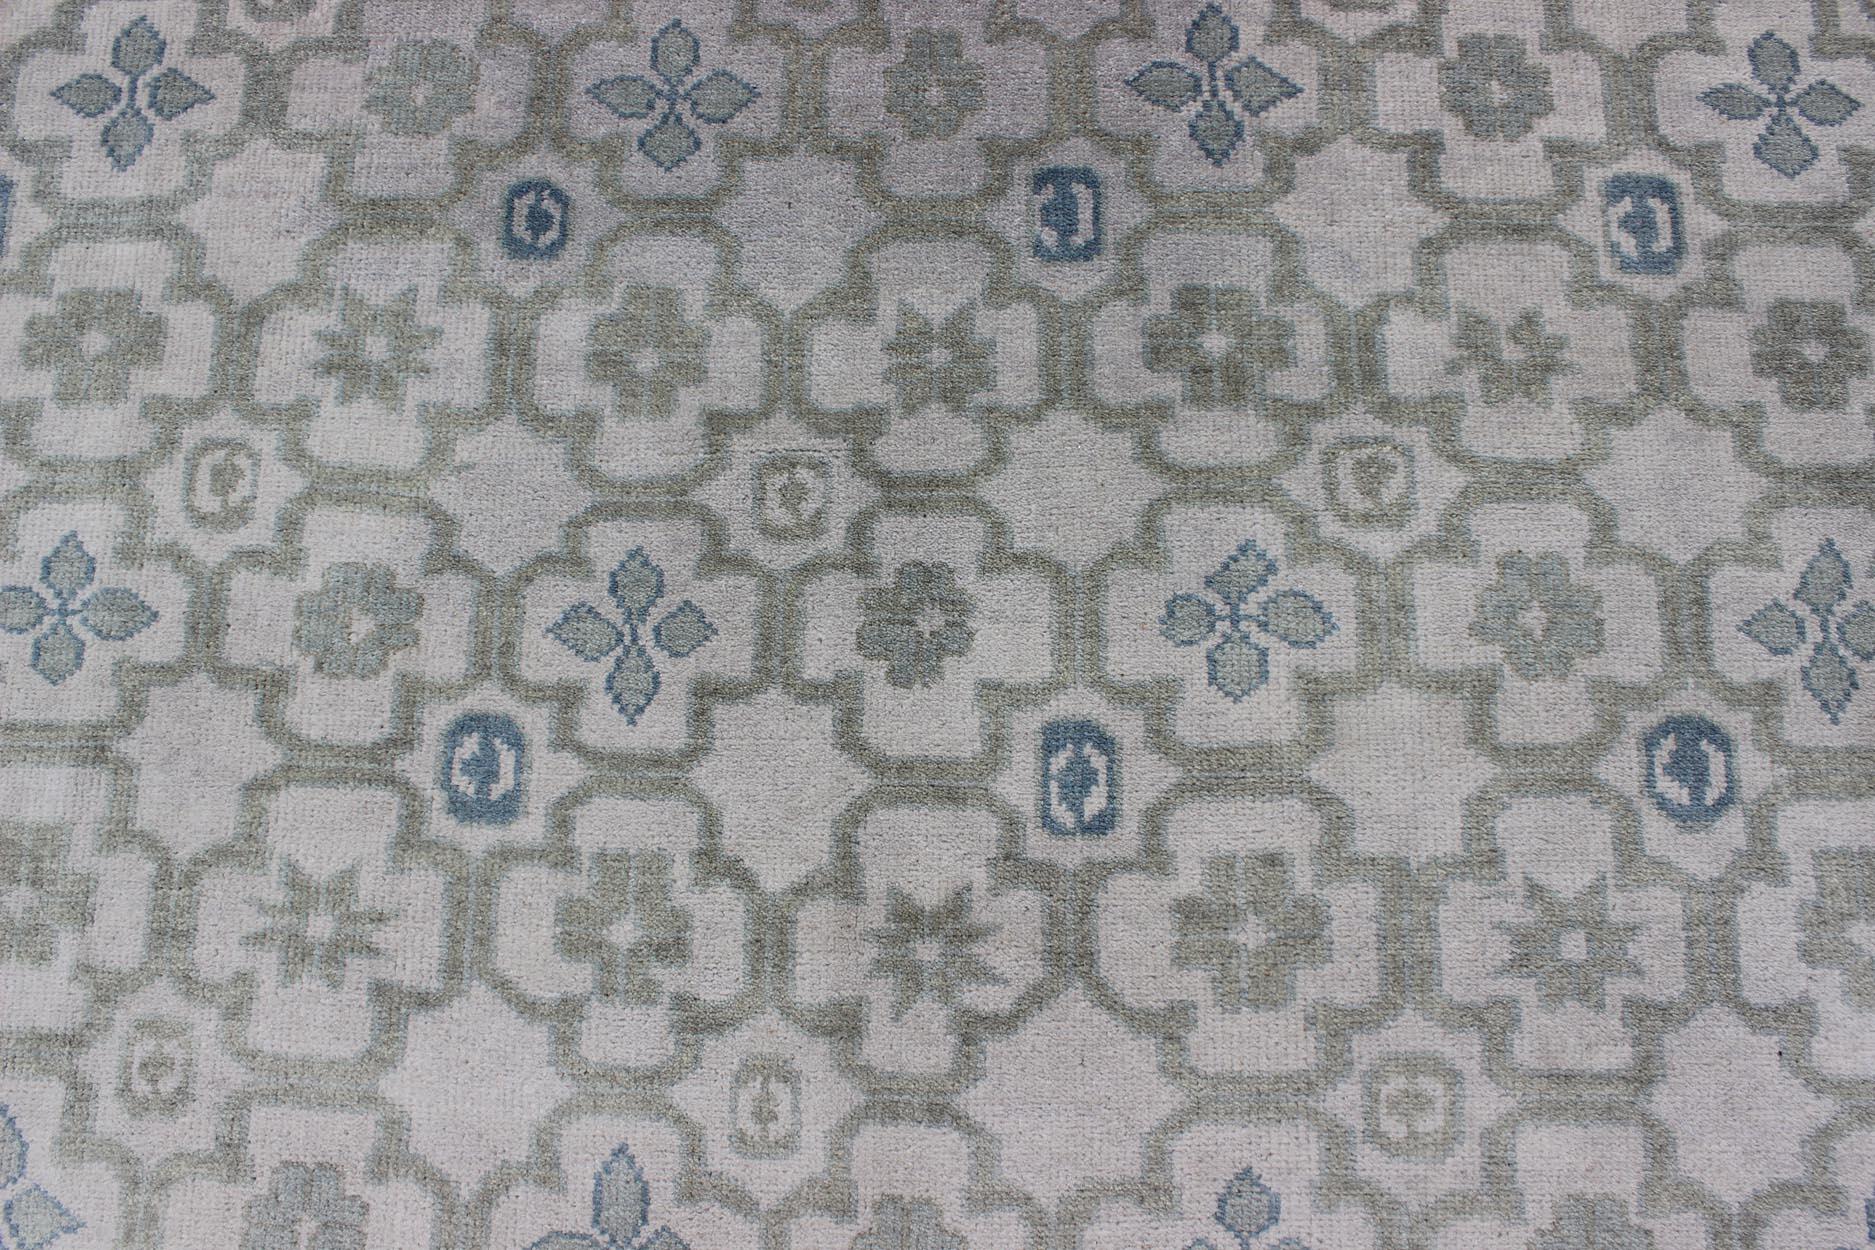 Modern Hand-Knotted Khotan Rug in Wool with All-Over Sub-Geometric Design. 
Measures: 8'0 x 10'0.
This modern Khotan rug has been hand-knotted in wool and features an all-over sub-geometric design rendered in blue, green and cream tones. A